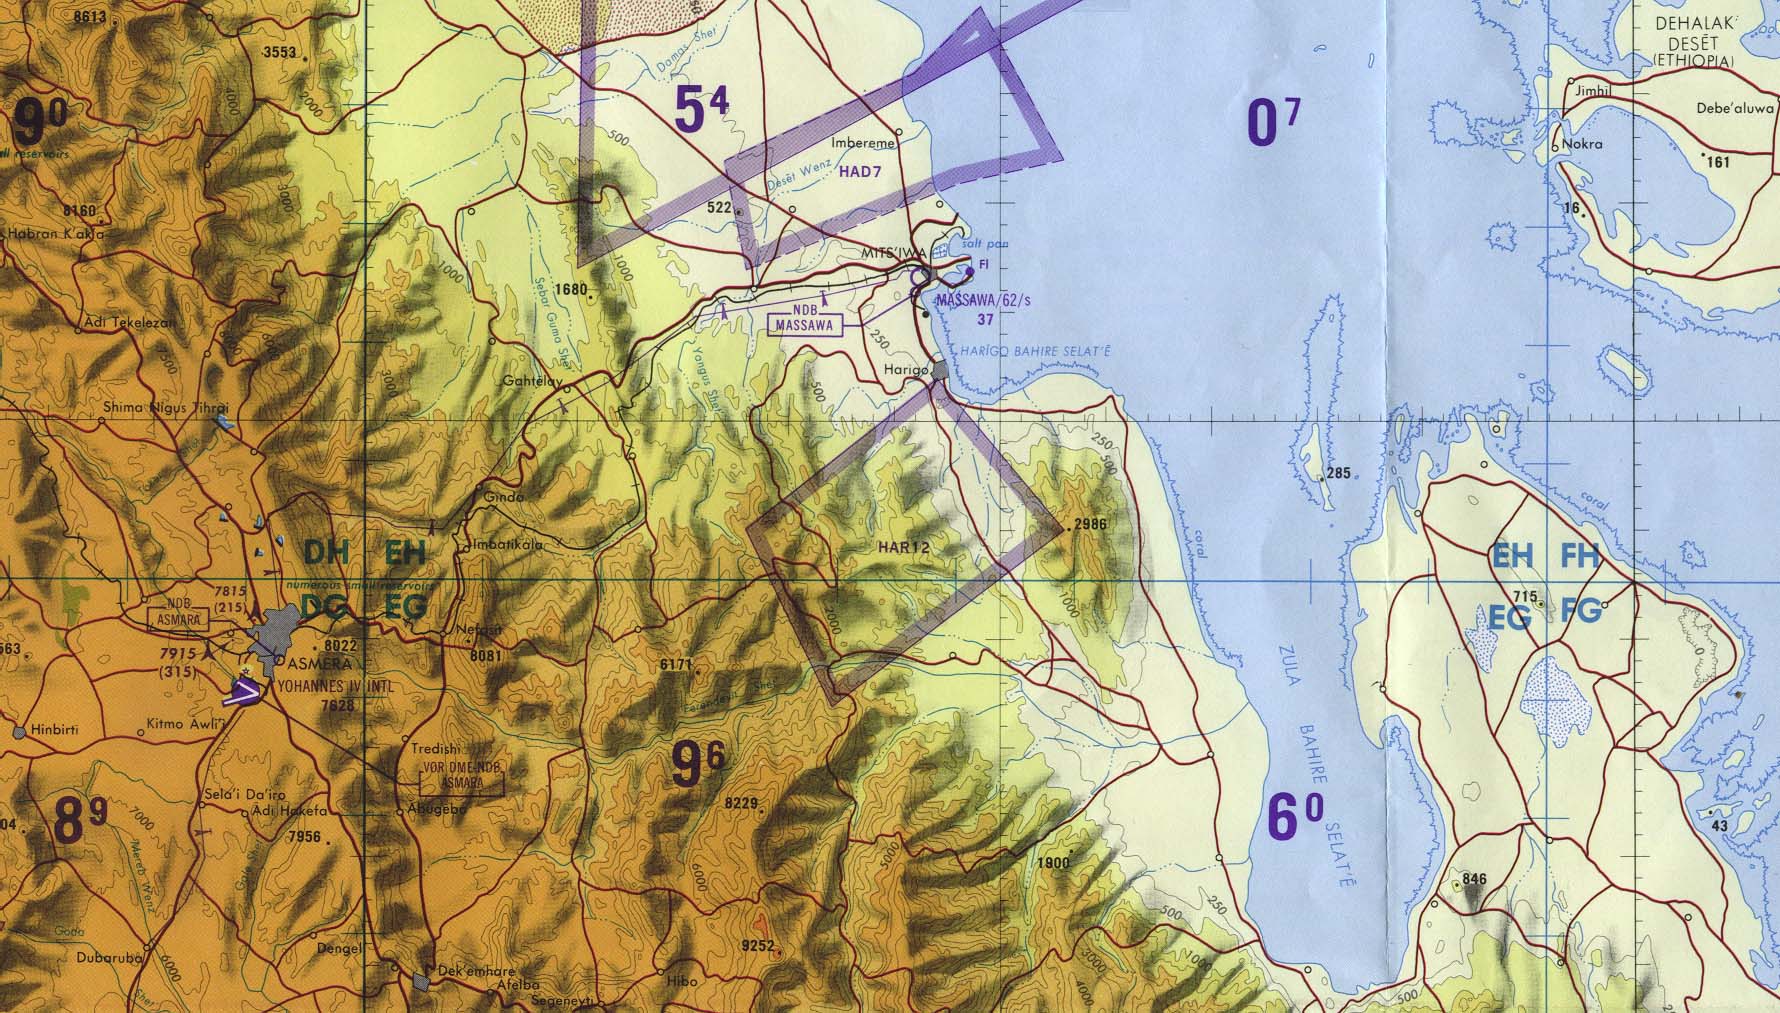 Map Of Eritrea Asmara/massawa Area (tactical pilotage chart) original scale 1:500,000 Portion of Defense Mapping Agency TPC K-5B 1988 (331K) Not for natigational use 